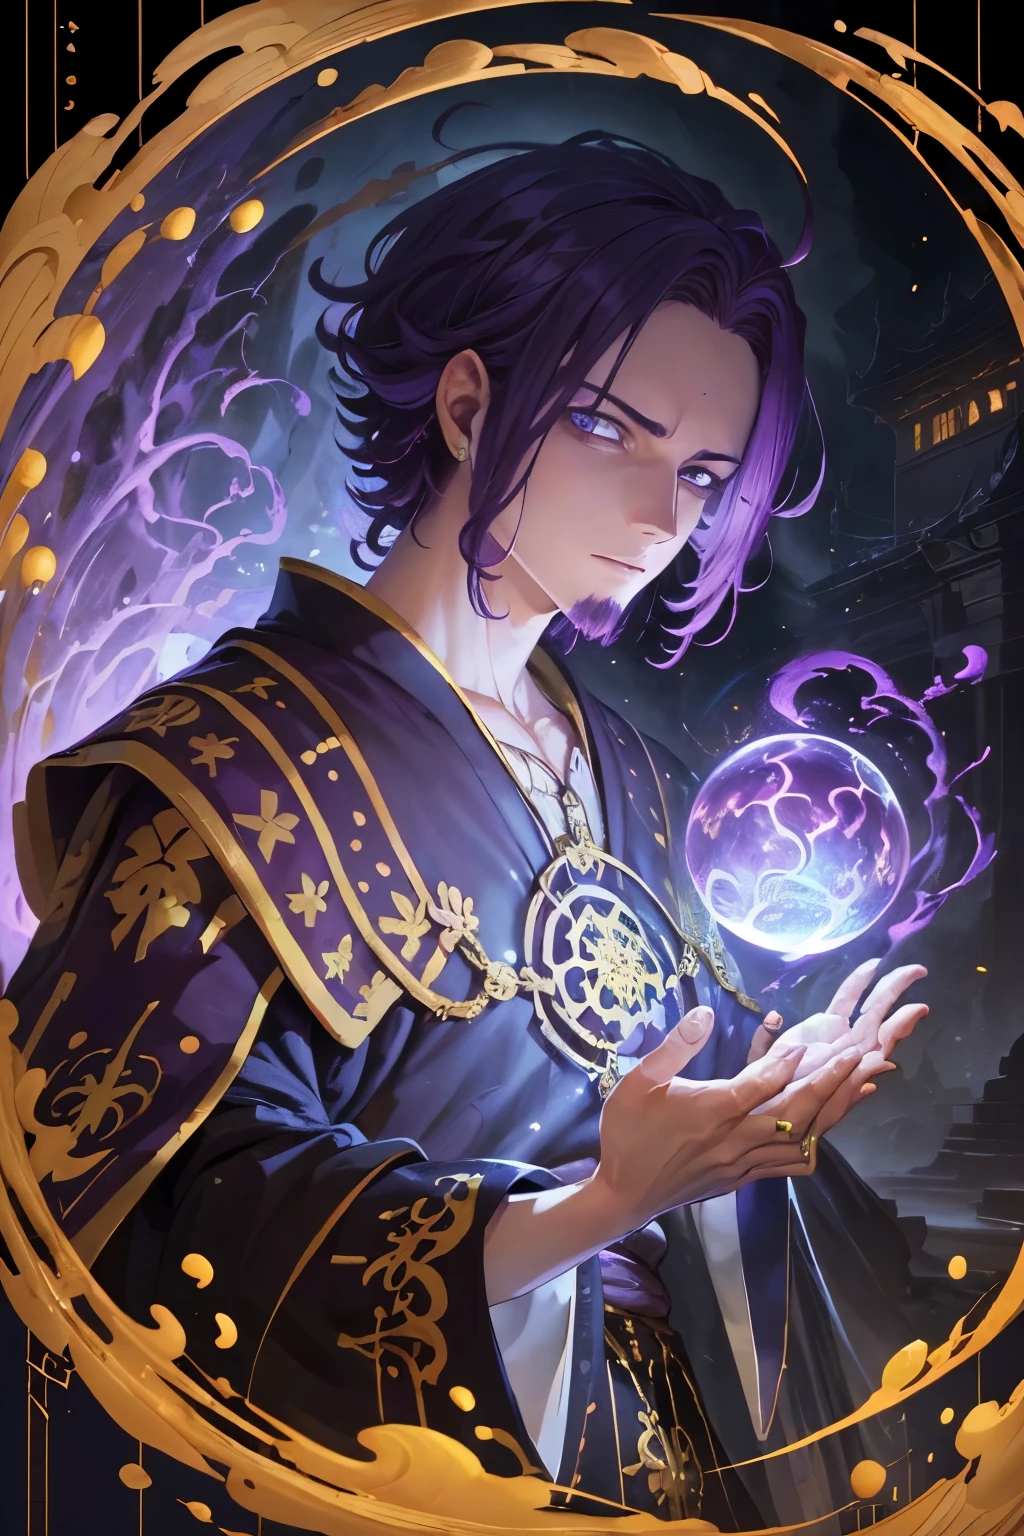 ((best qualityer)), ((work of art)), ((ultra realisitic)),(handsome man, cabelo roxo, mohawk hair, purples eyes:1.2), beautiful intricately detailed soft oil painting of a looming tenebrosa lord, 1 men, Evil Wizard with Glowing Eyes, frown detailed face, intricately embroidered robes, terrifying, tenebrosa, Evil castle on a stormy night, lightening, Raby, casting a spell, (comiс style), glowing Rabybow colored magic, purple mohawk